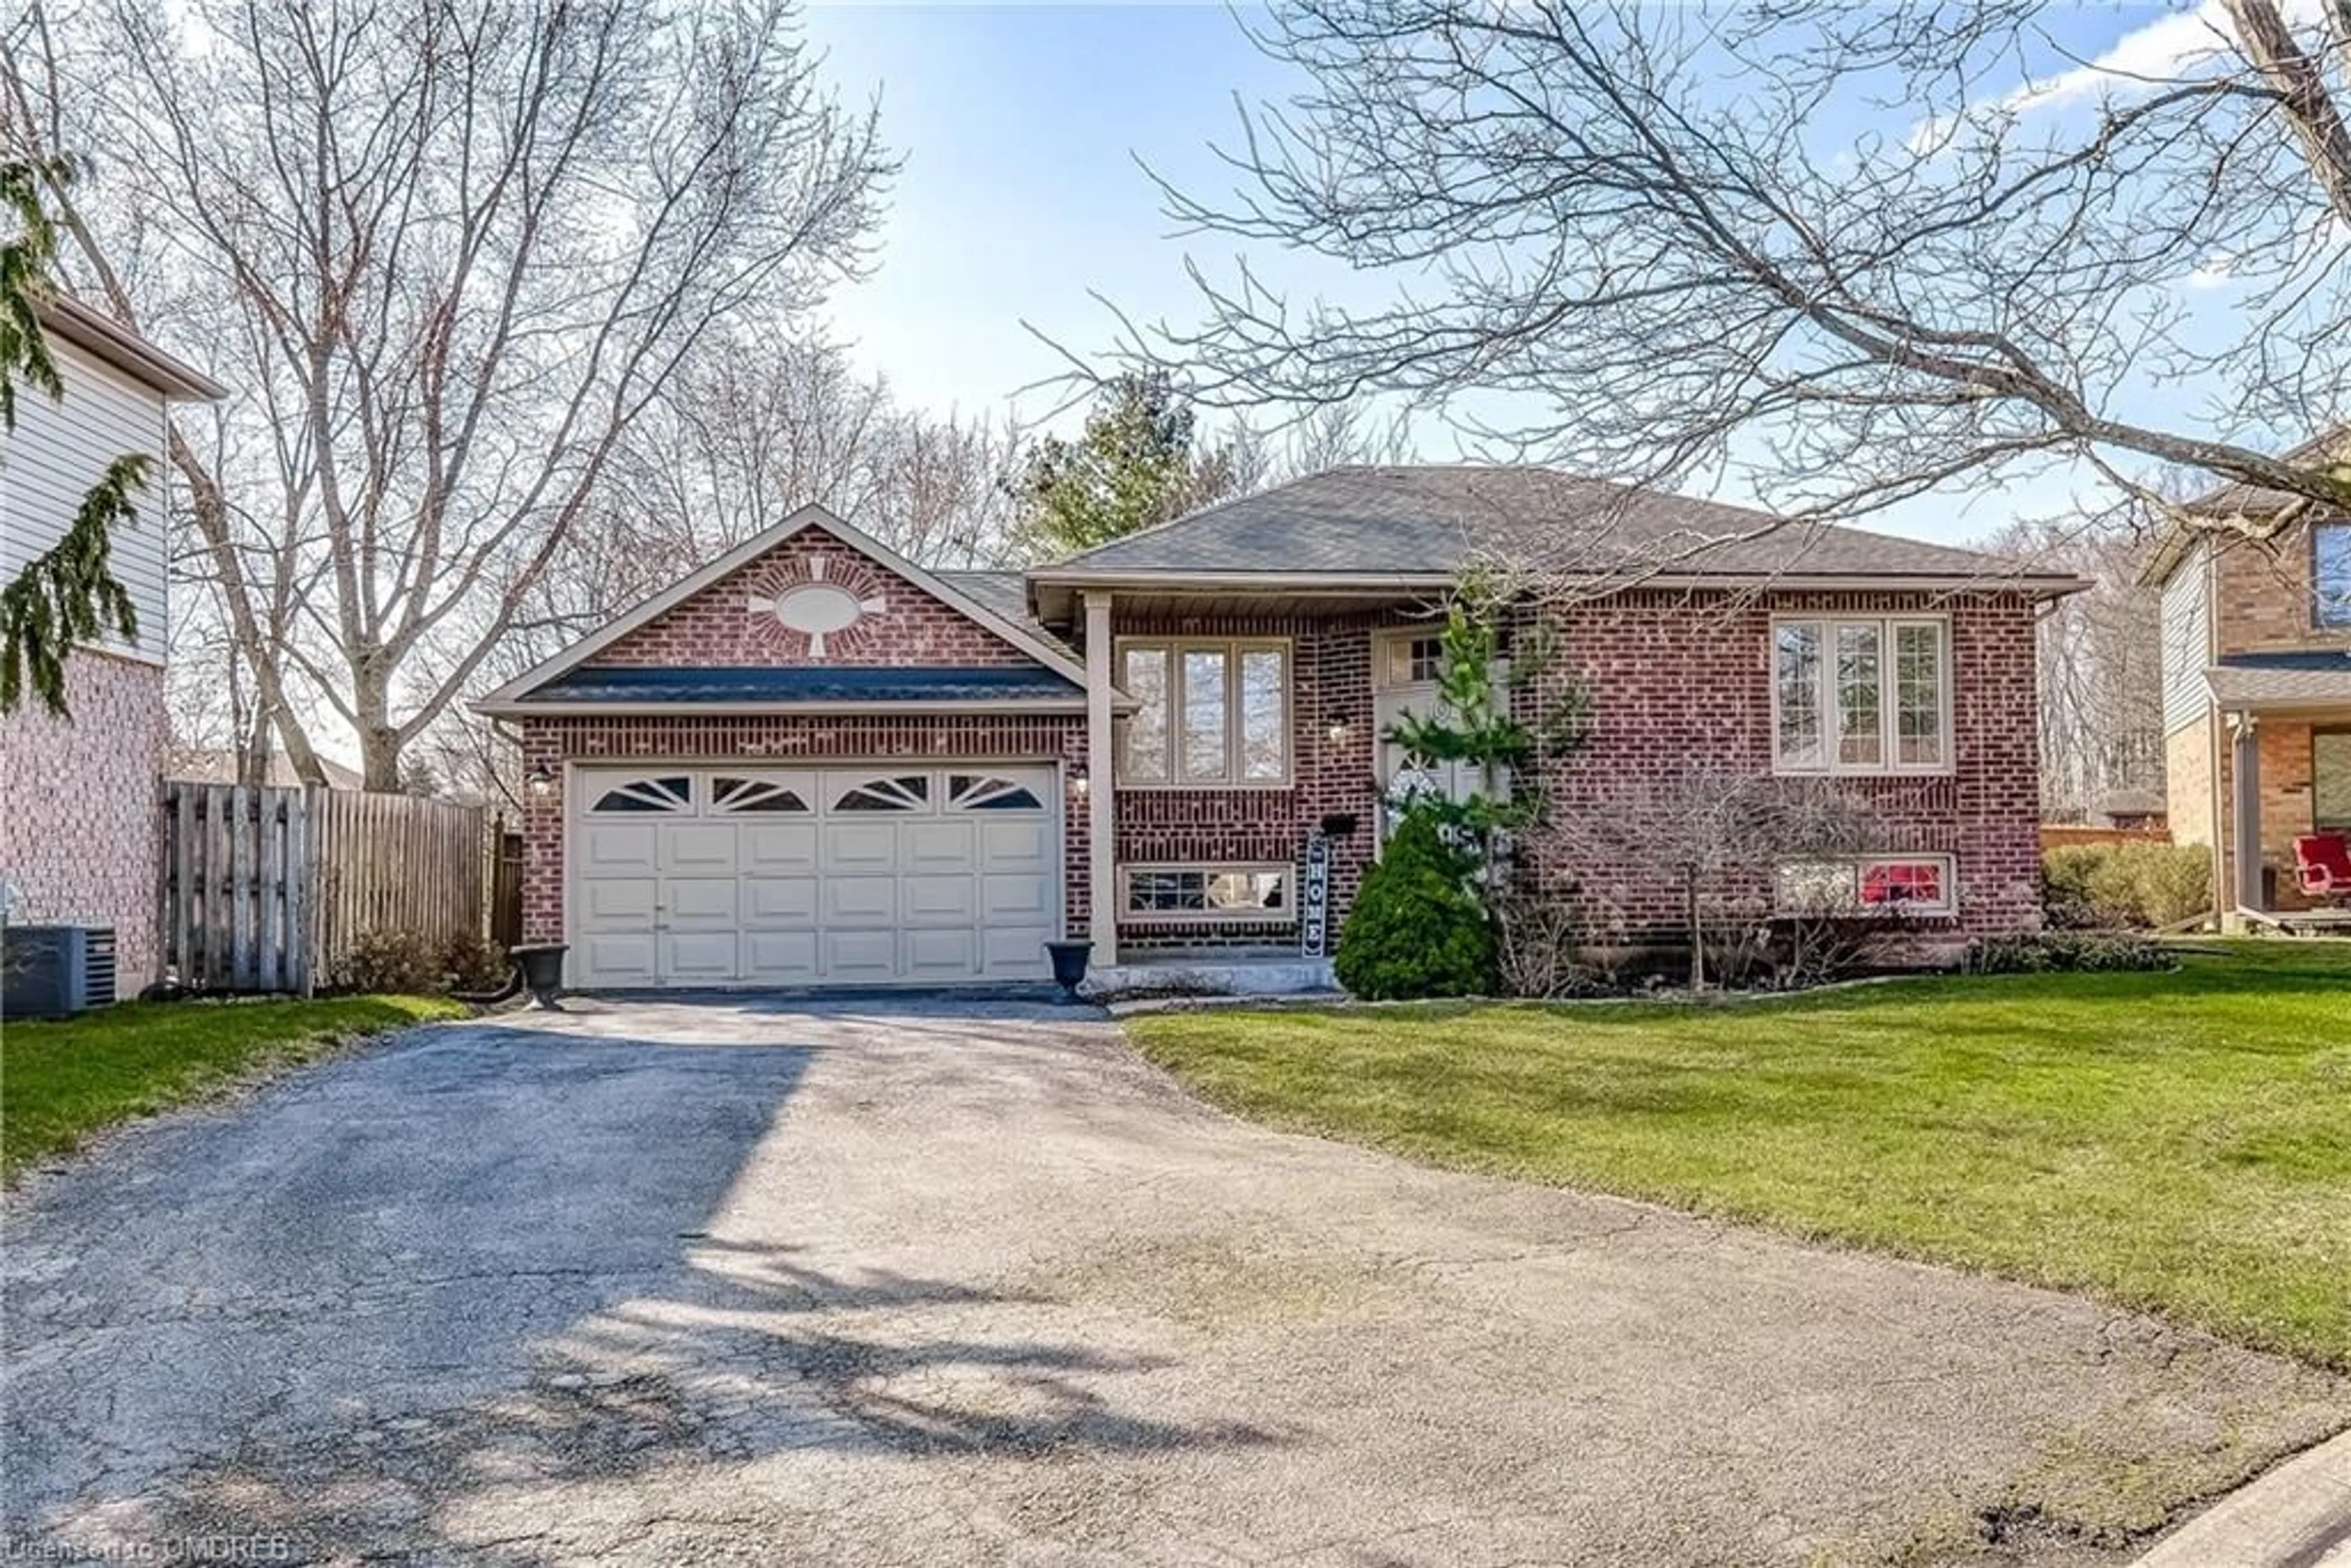 Frontside or backside of a home for 107 Madison Crt, Welland Ontario L3G 7G1